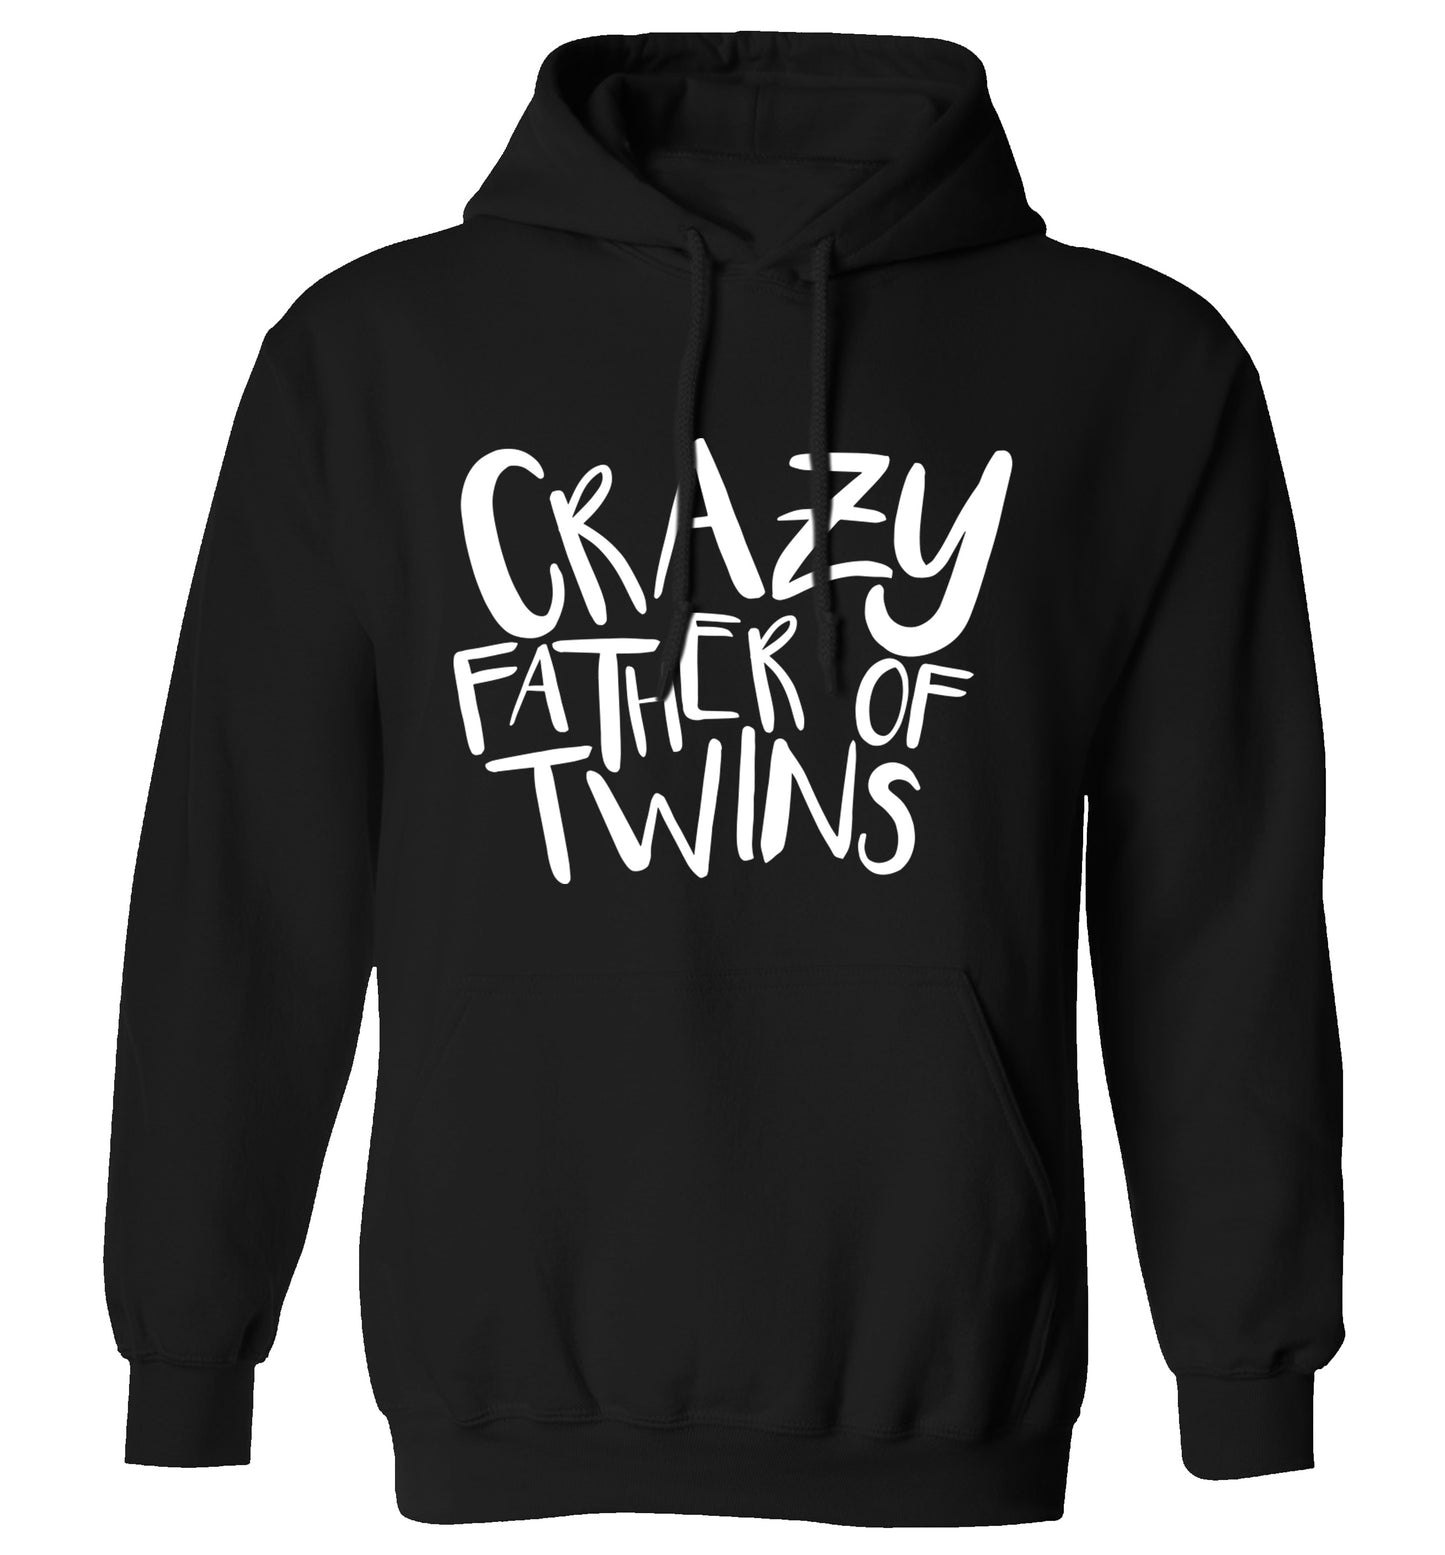 Crazy father of twins adults unisex black hoodie 2XL